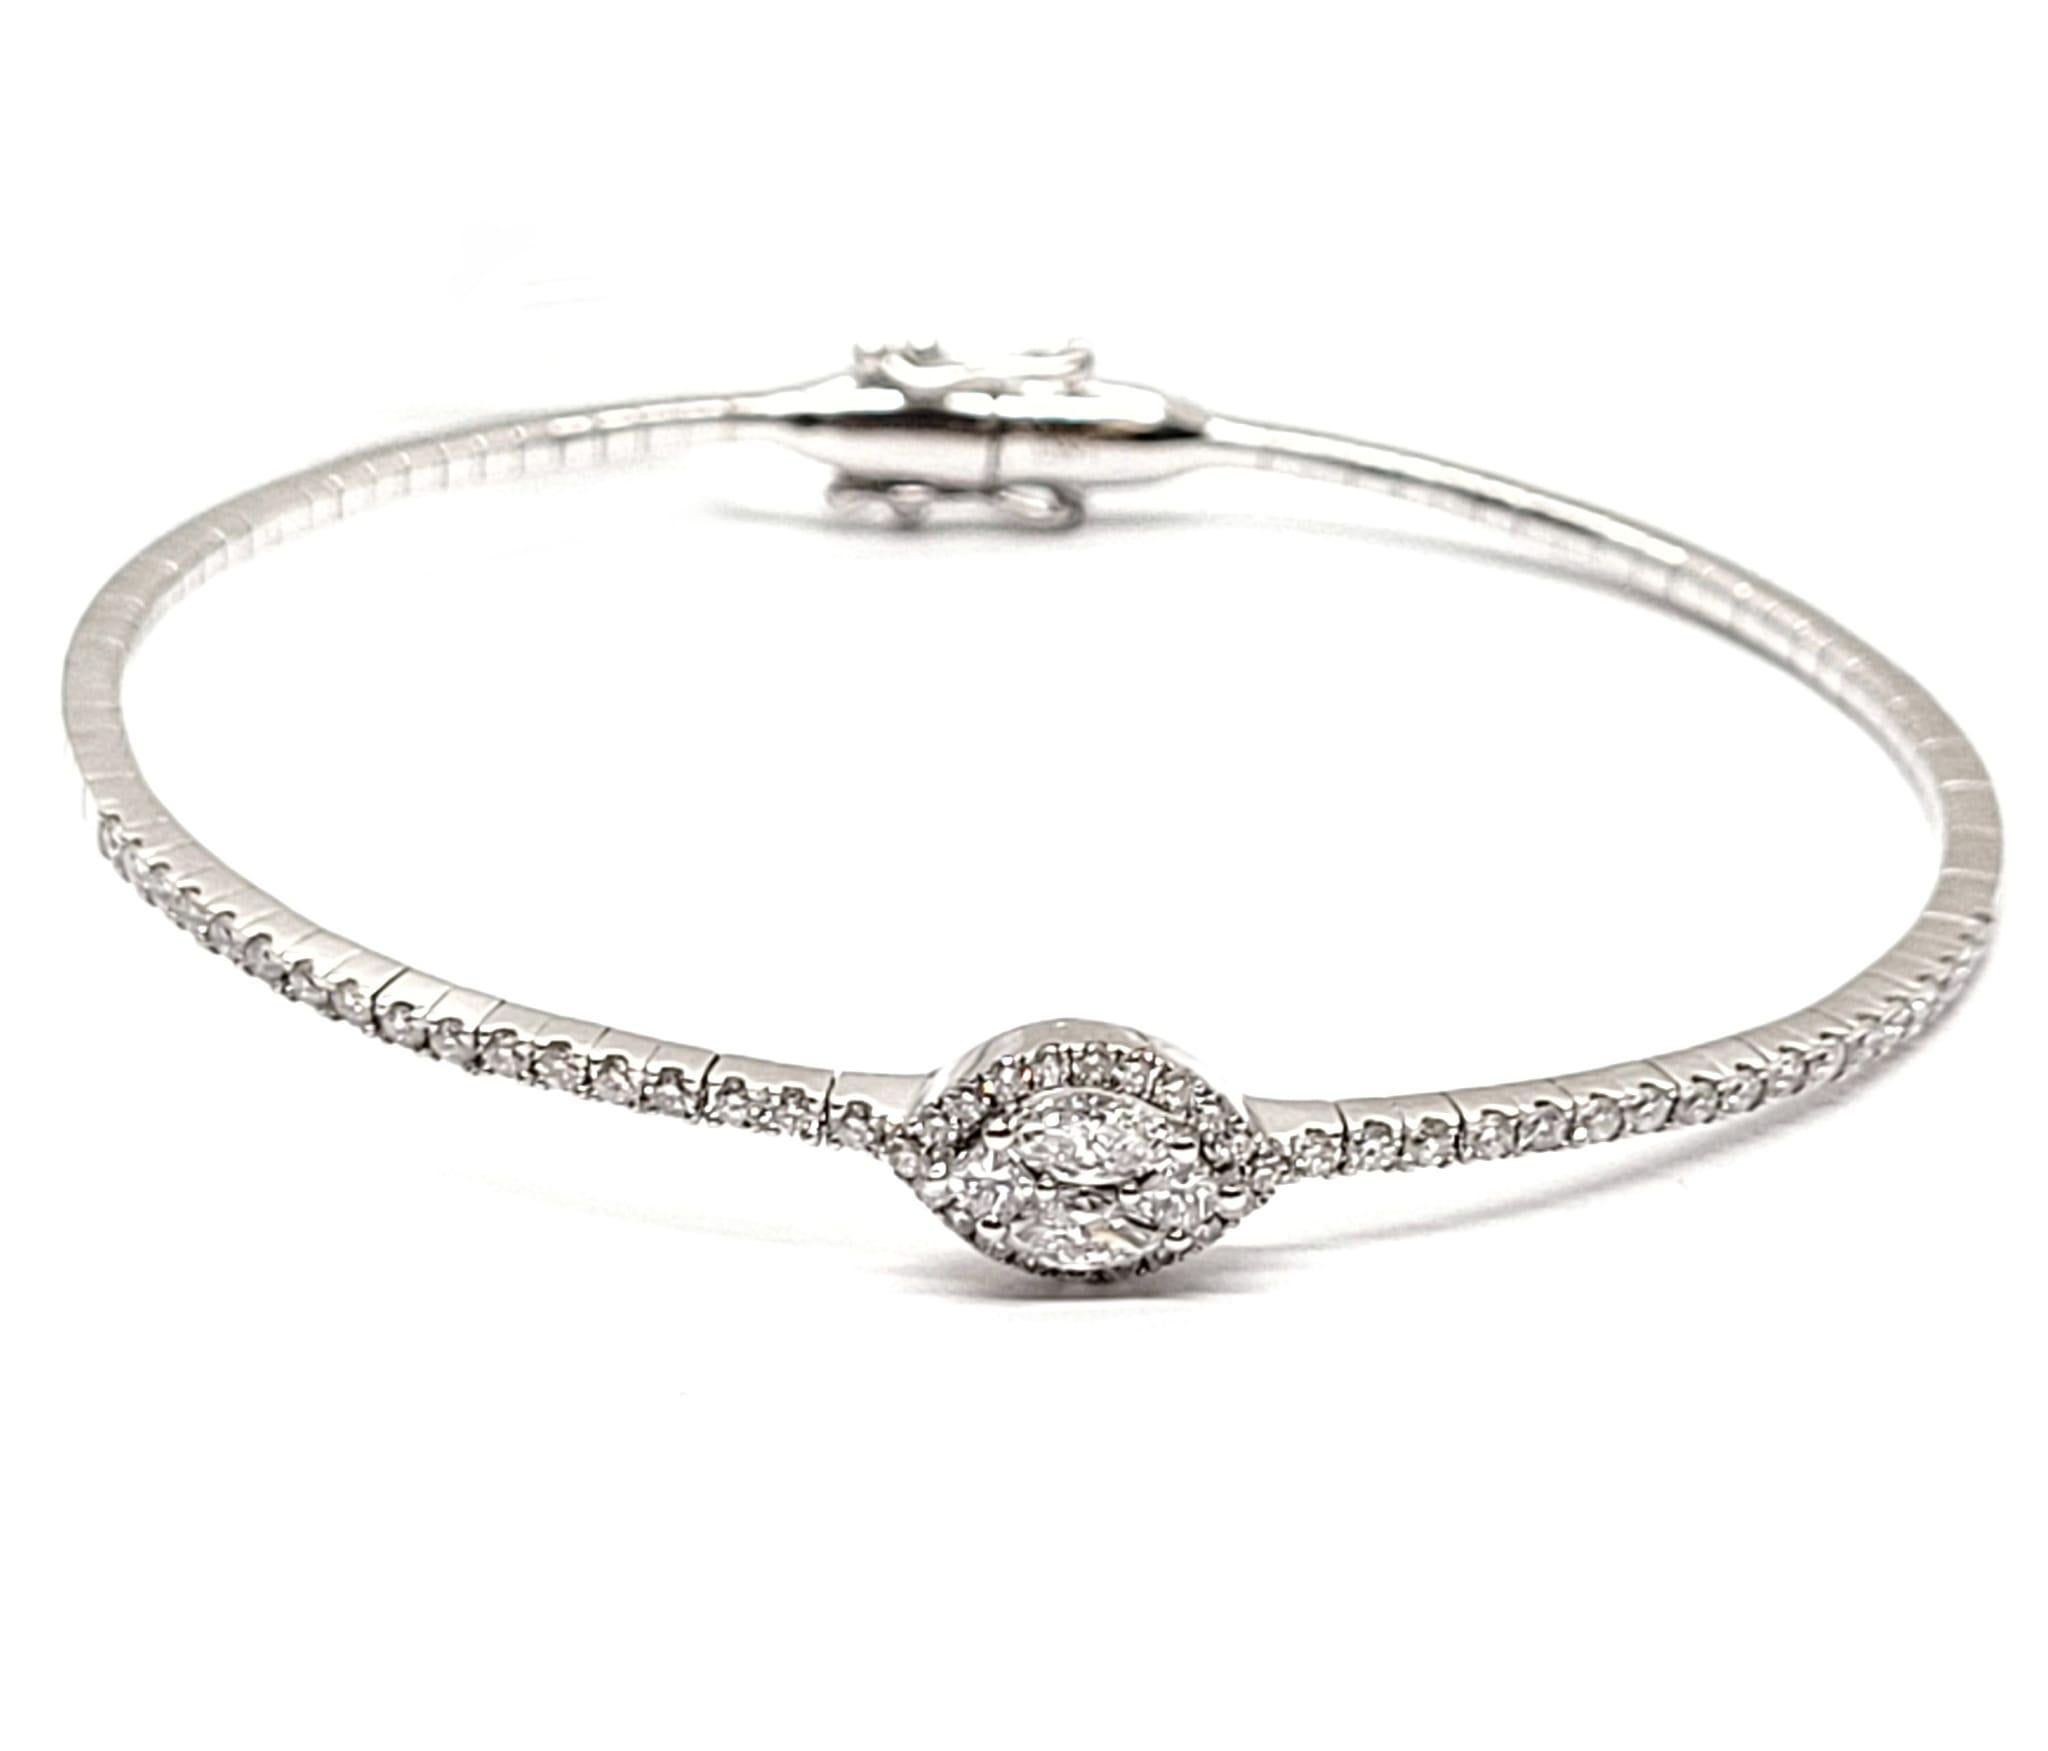 Andreoli Invisible Diamond 18 Karat Gold Bangle Bracelet

This bracelet features:
- 0.92 Carat Diamond
- 8.21 g 18kt White Gold
- Made In Italy